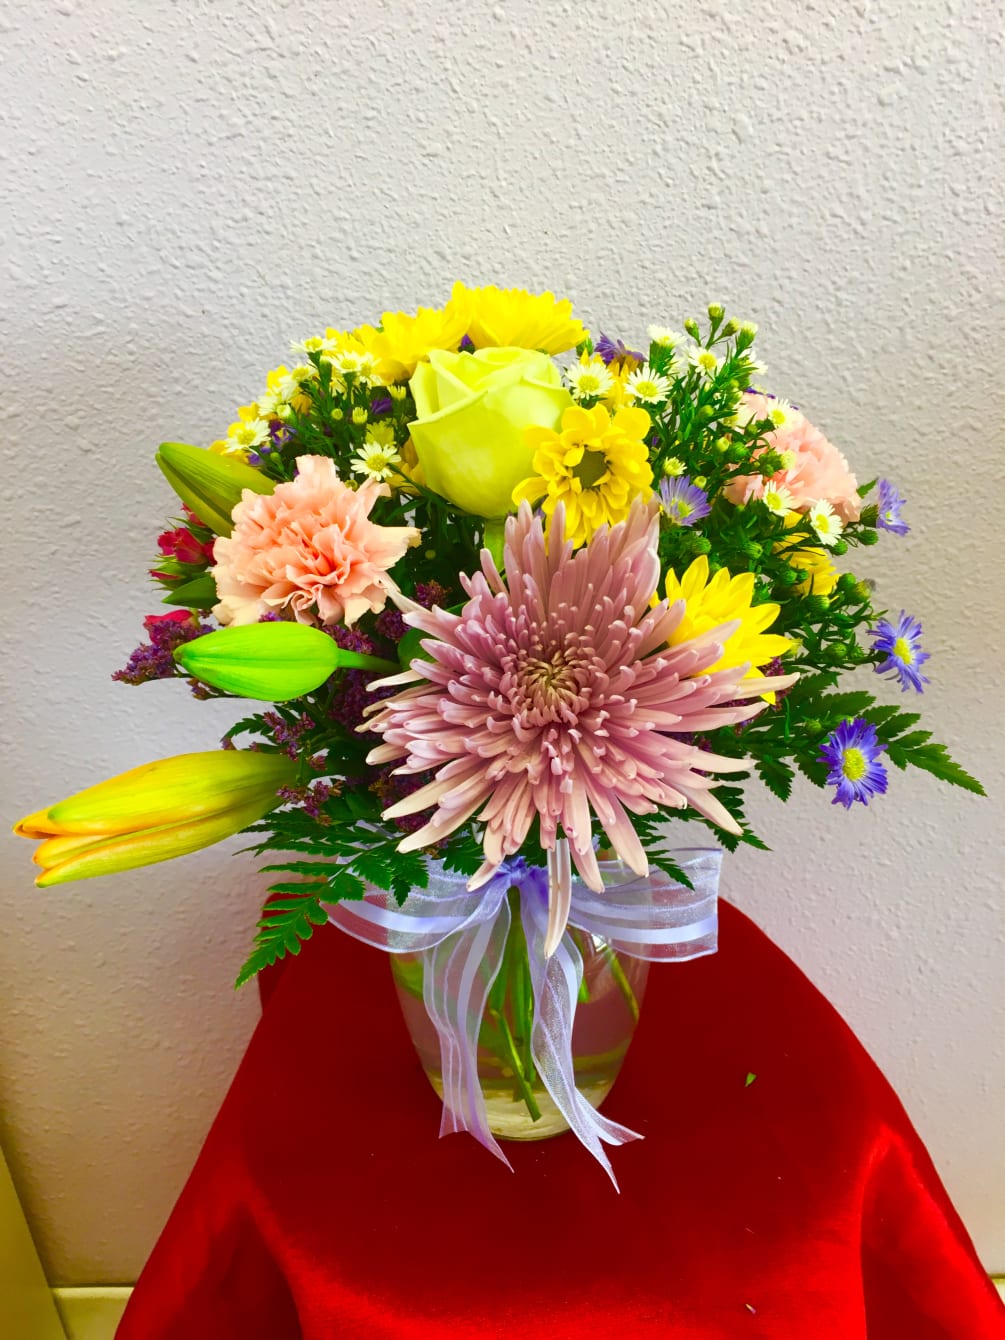 A spring bouquet containing carnations, lilies, spider mums, etc..